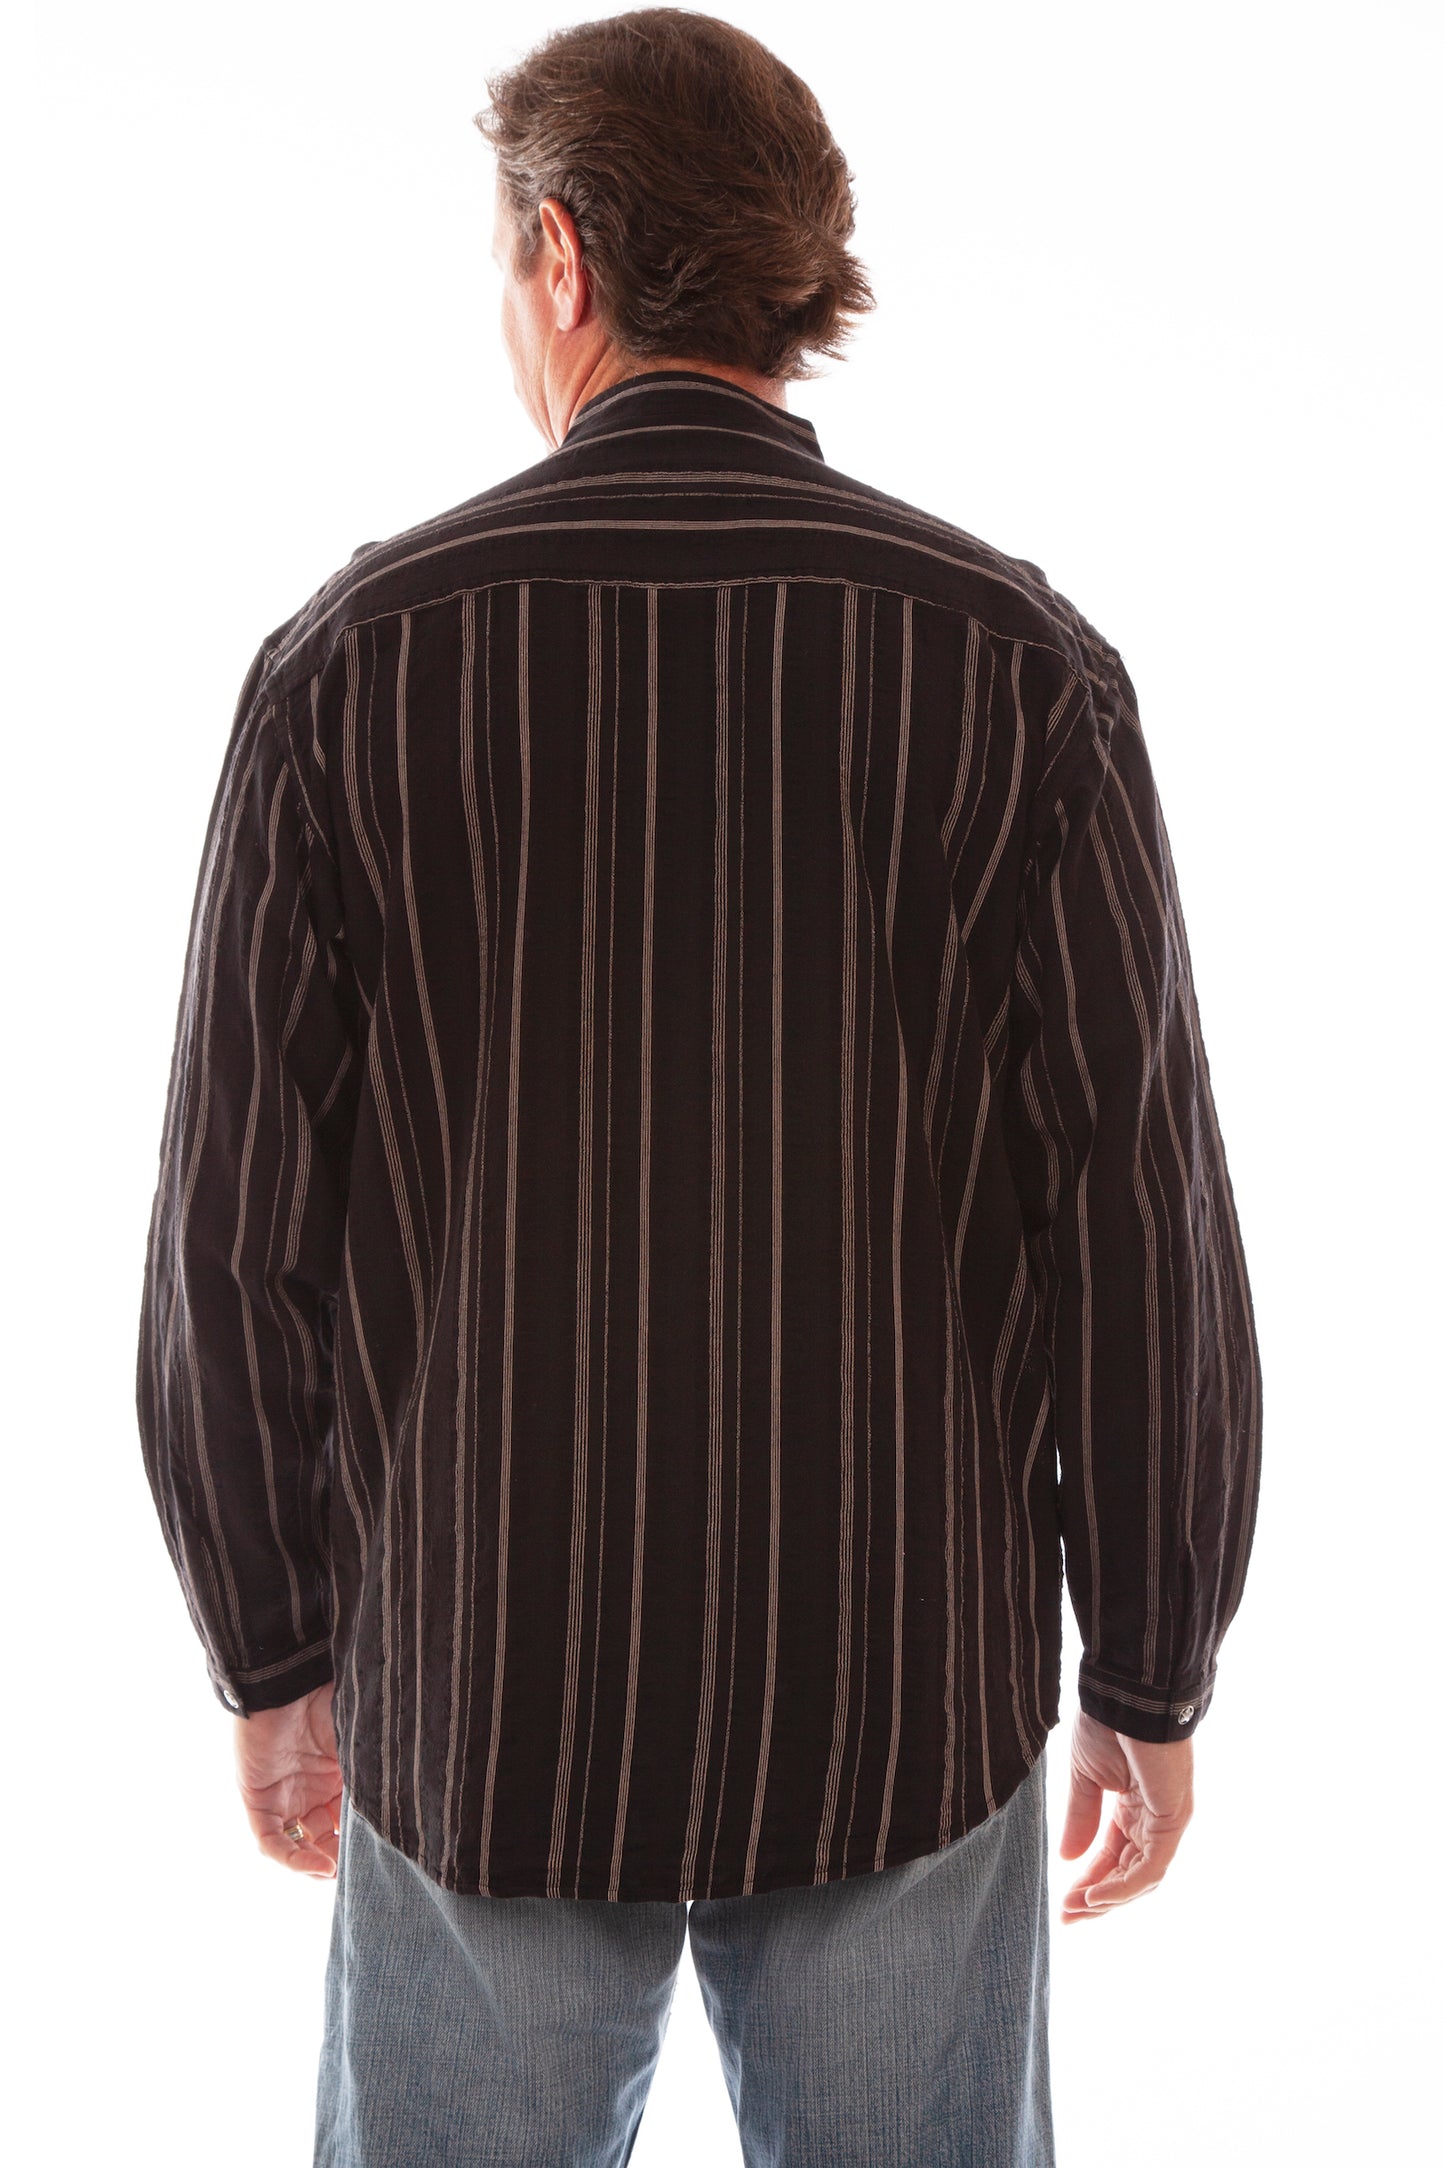 Scully® Men's Rangewear Dobby Stripe Long Sleeve Button Front Old West Shirt